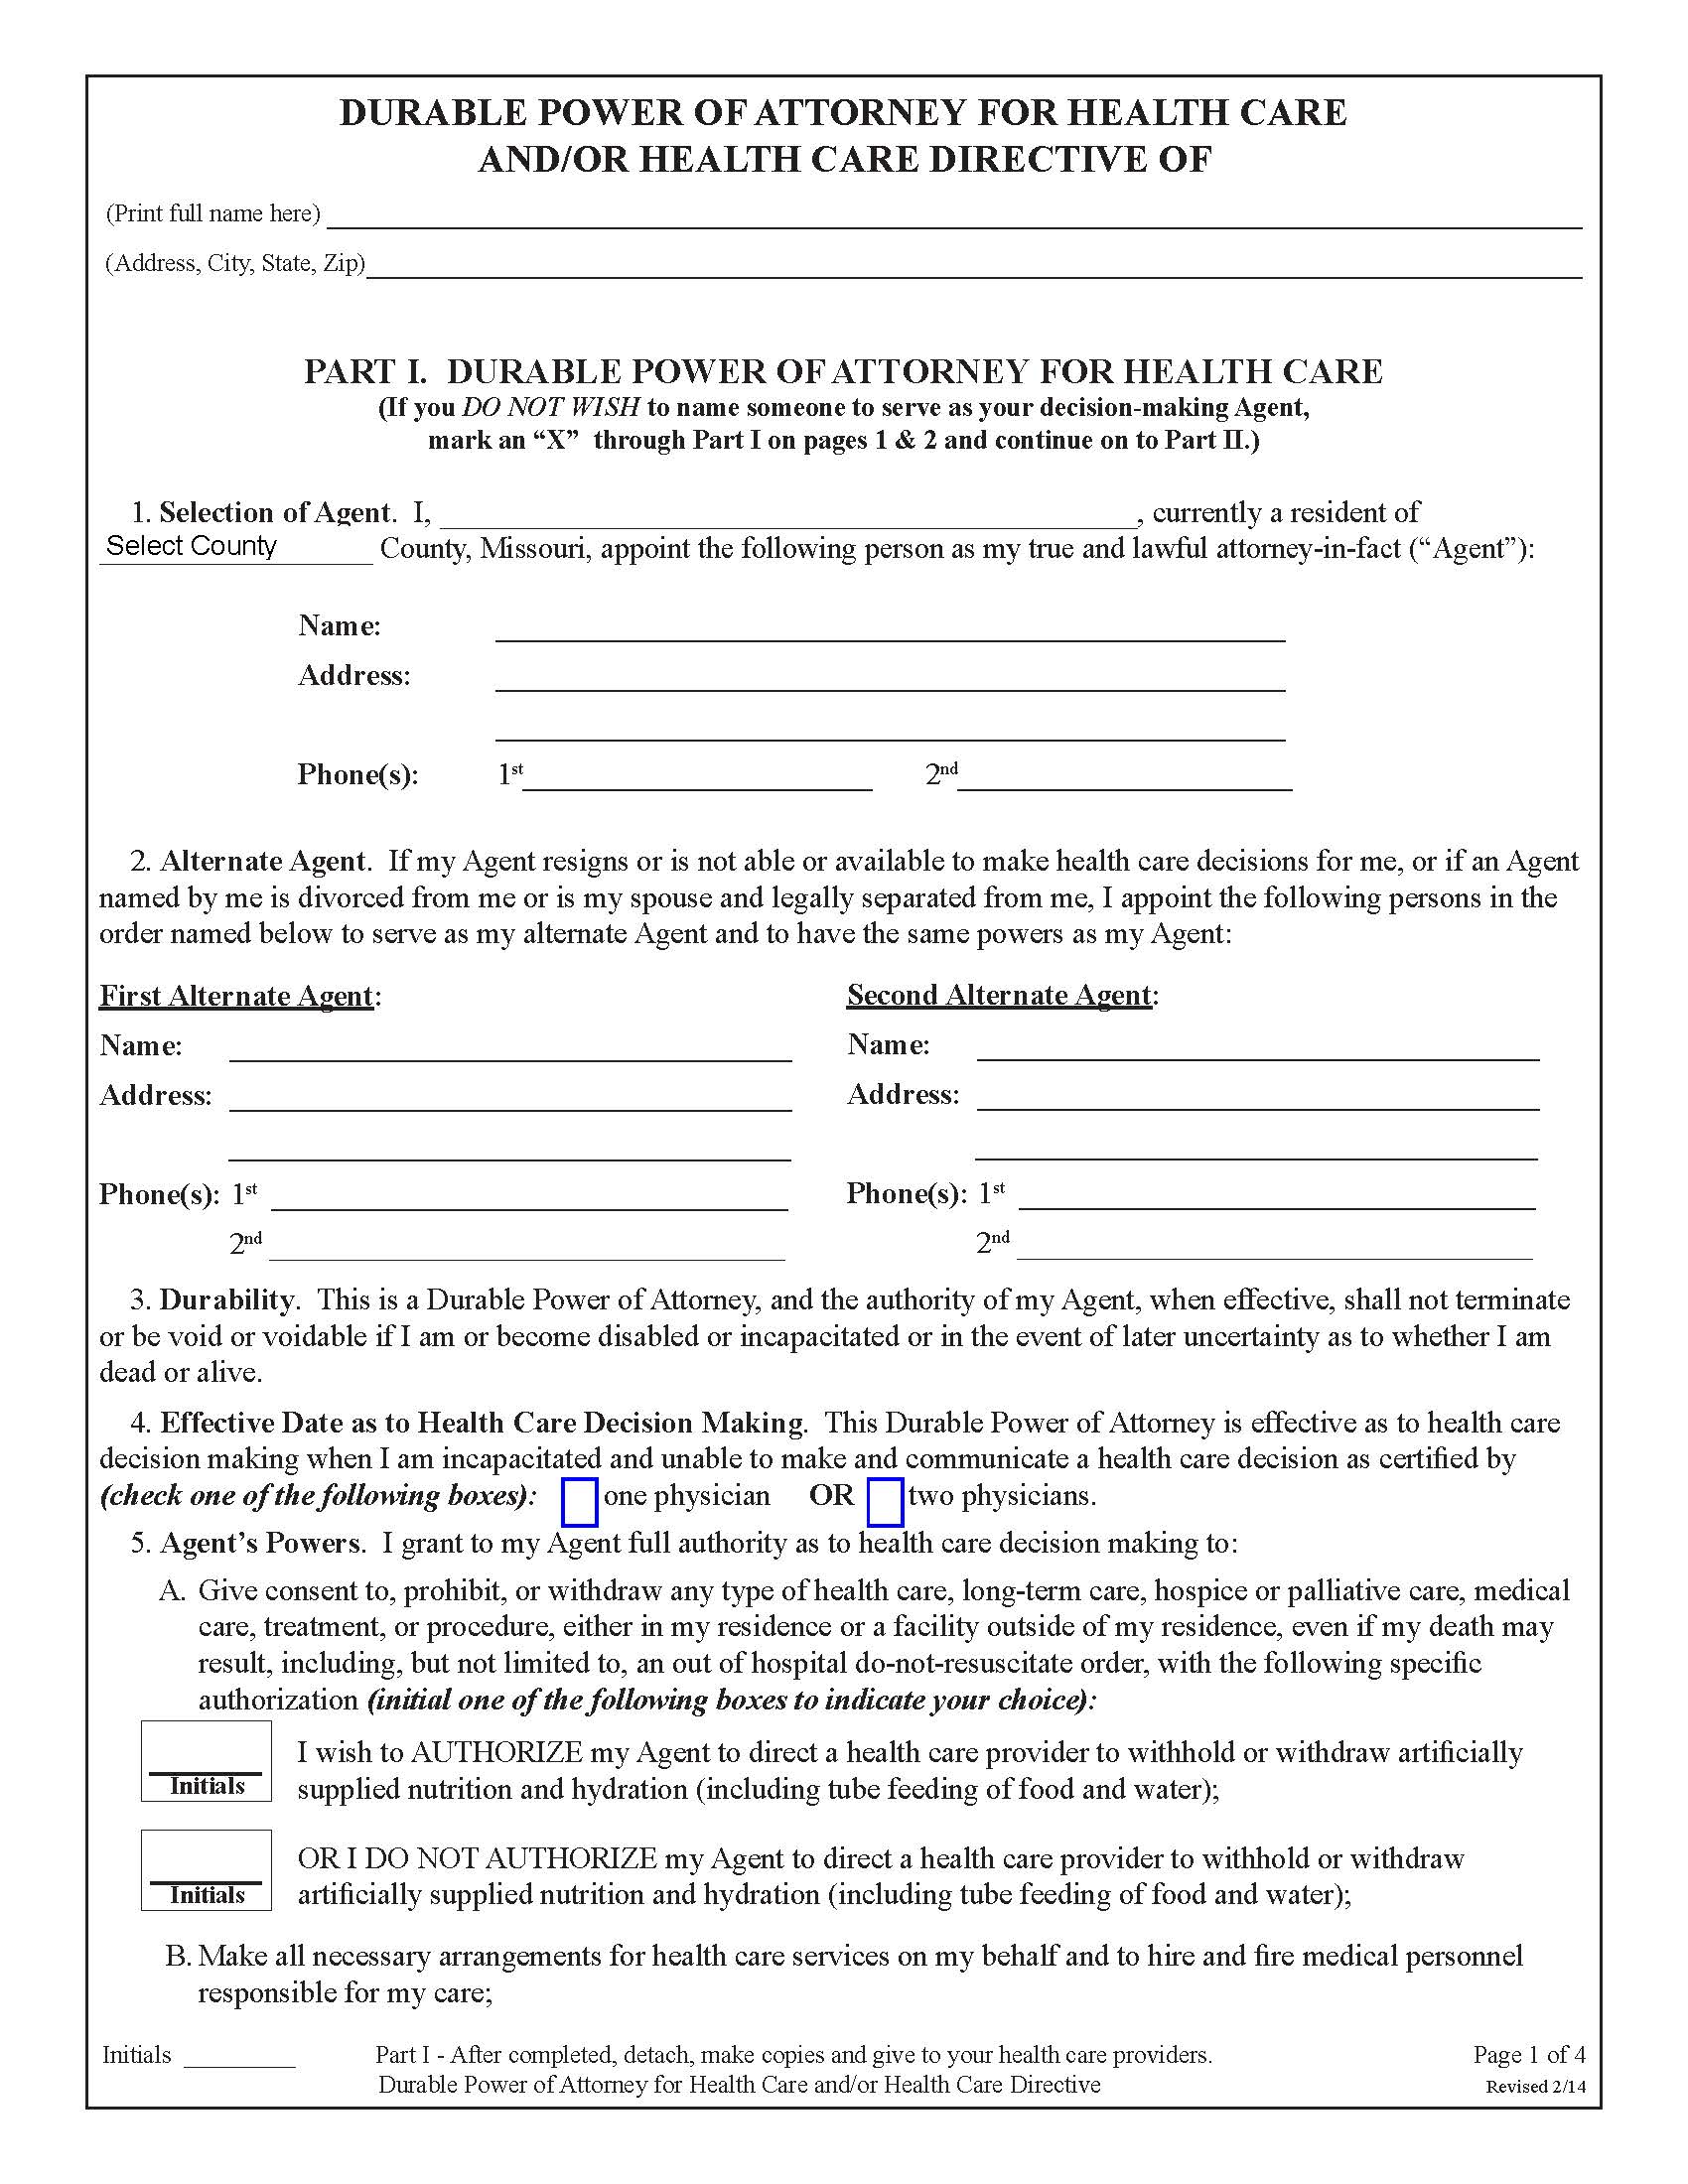 Medical Power of Attorney Template,